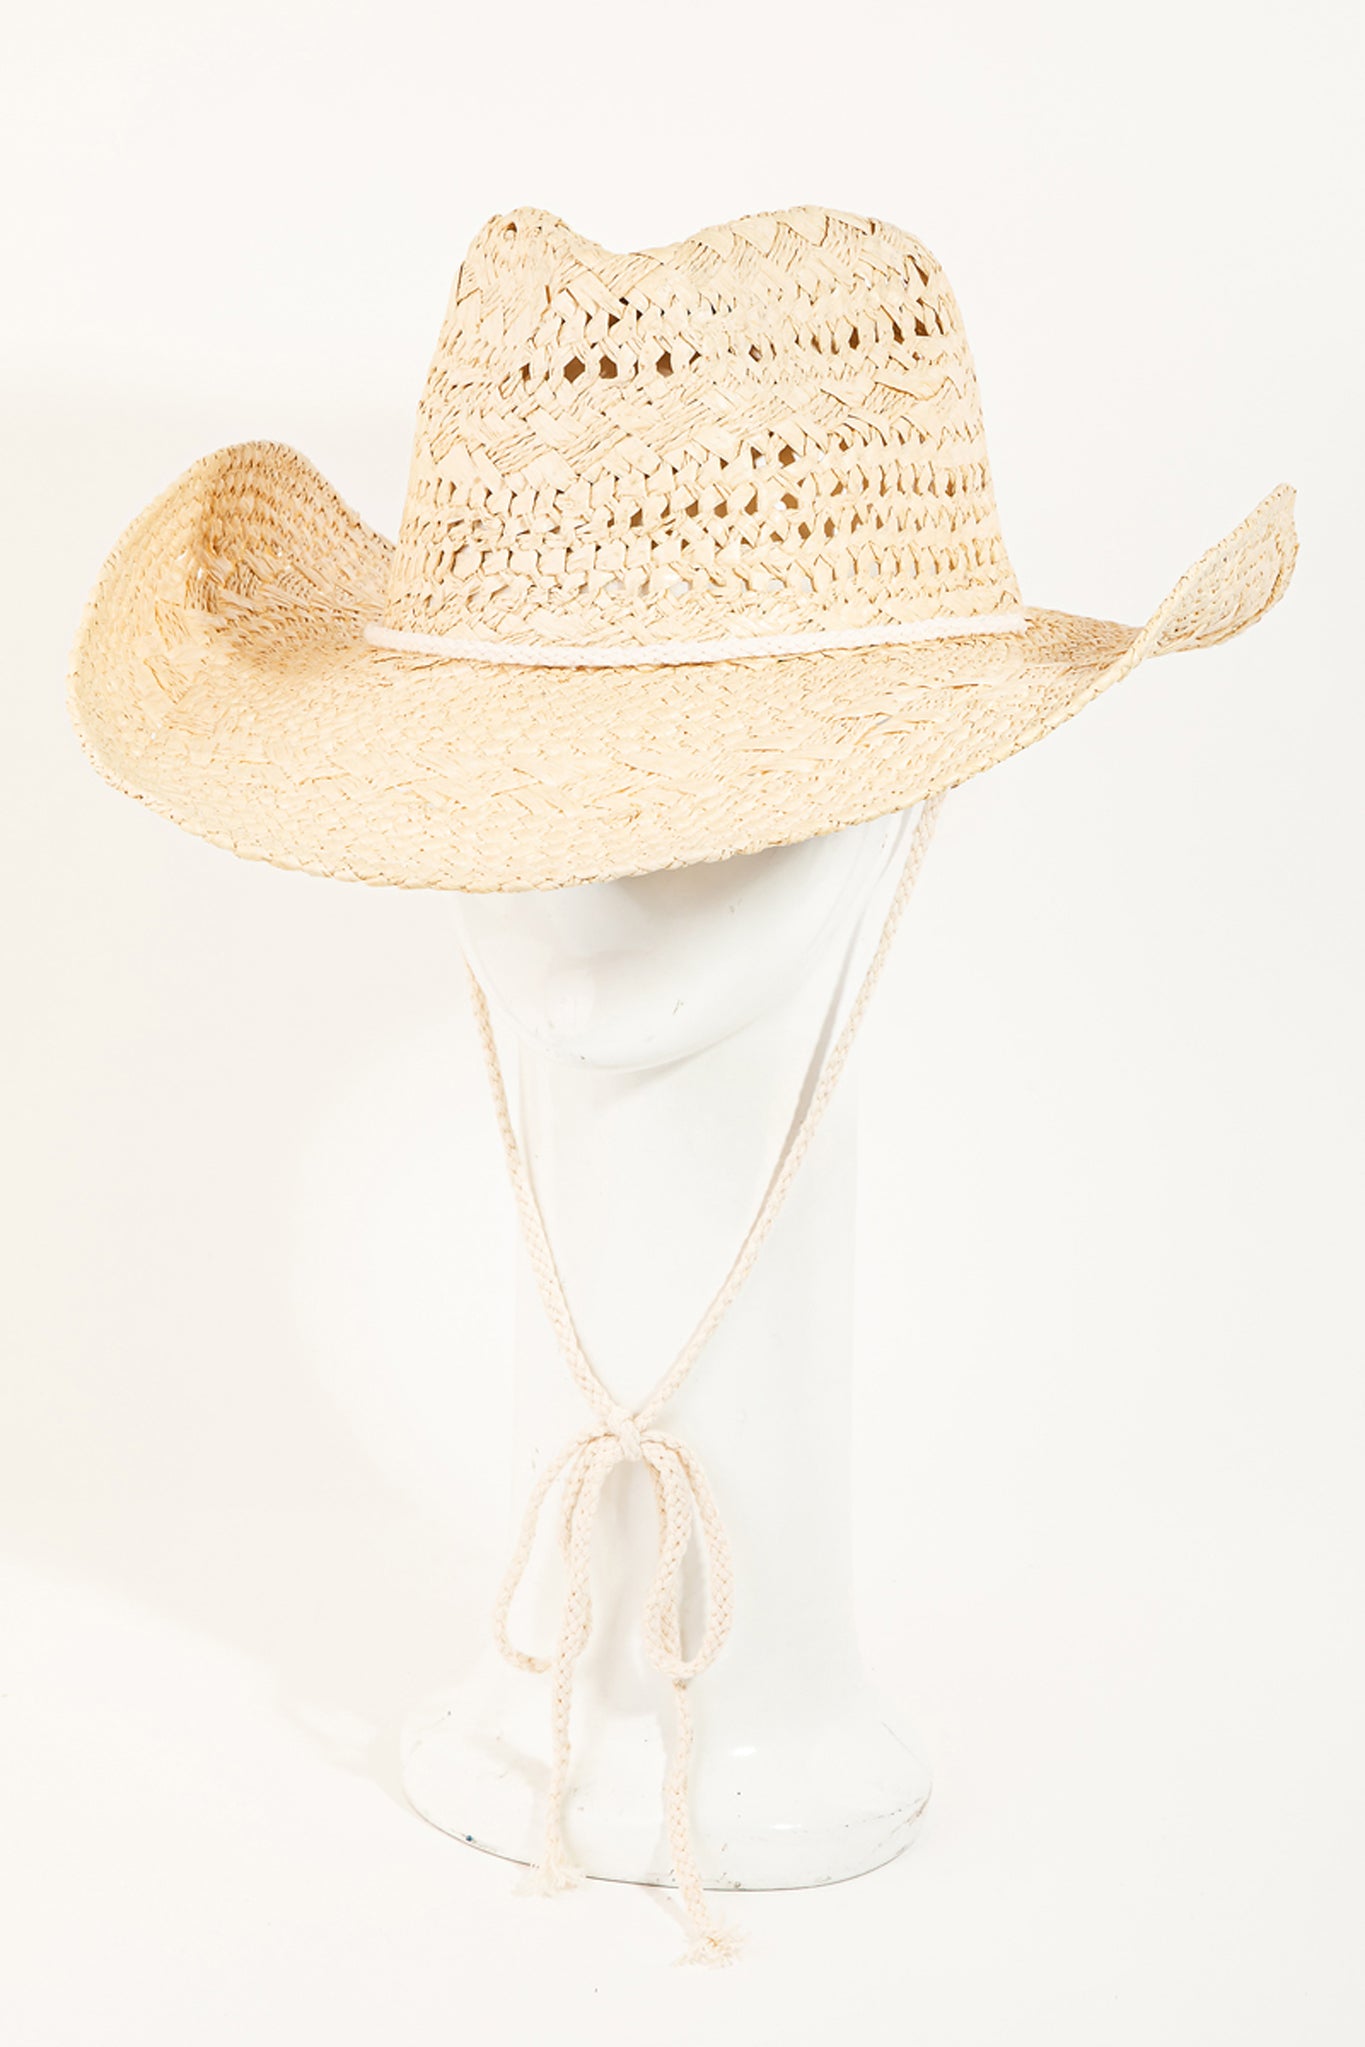 View 2 of Capo Straw Cowboy Hat in Ivory, a Hats from Larrea Cove. Detail: .